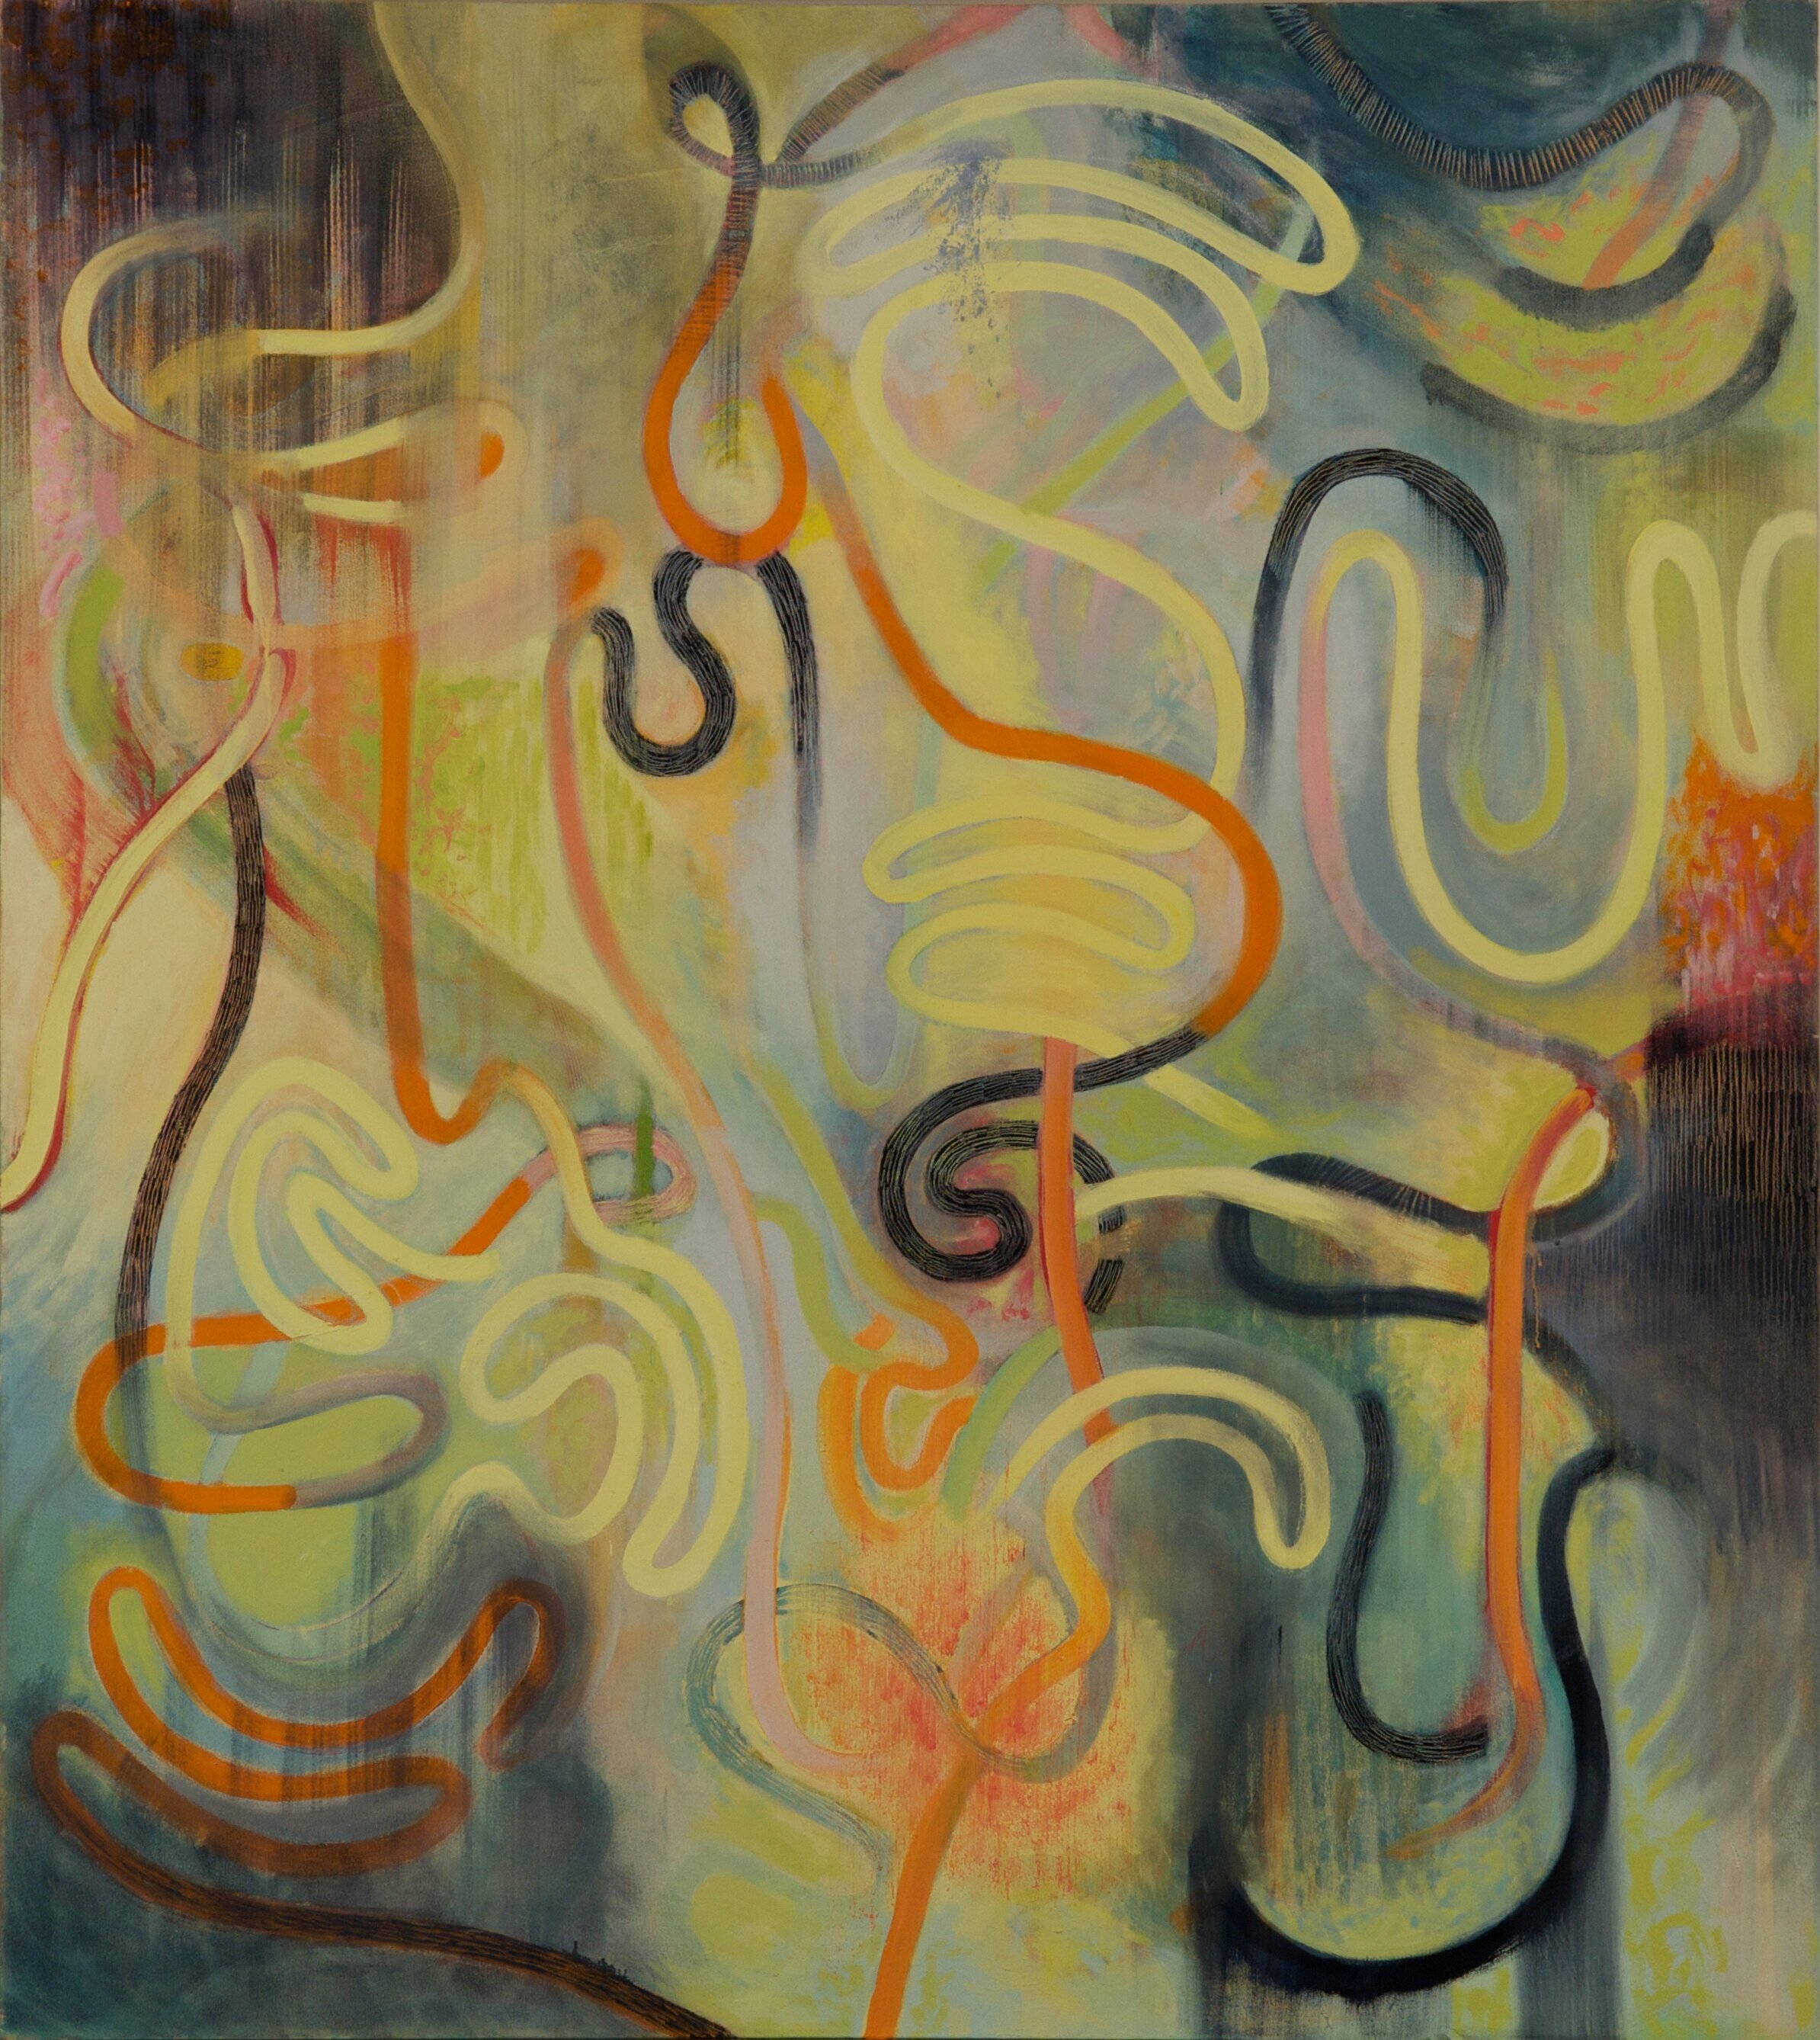   Dorset Redux , 64” x 60”, Oil and wax on canvas, 2008-2009 